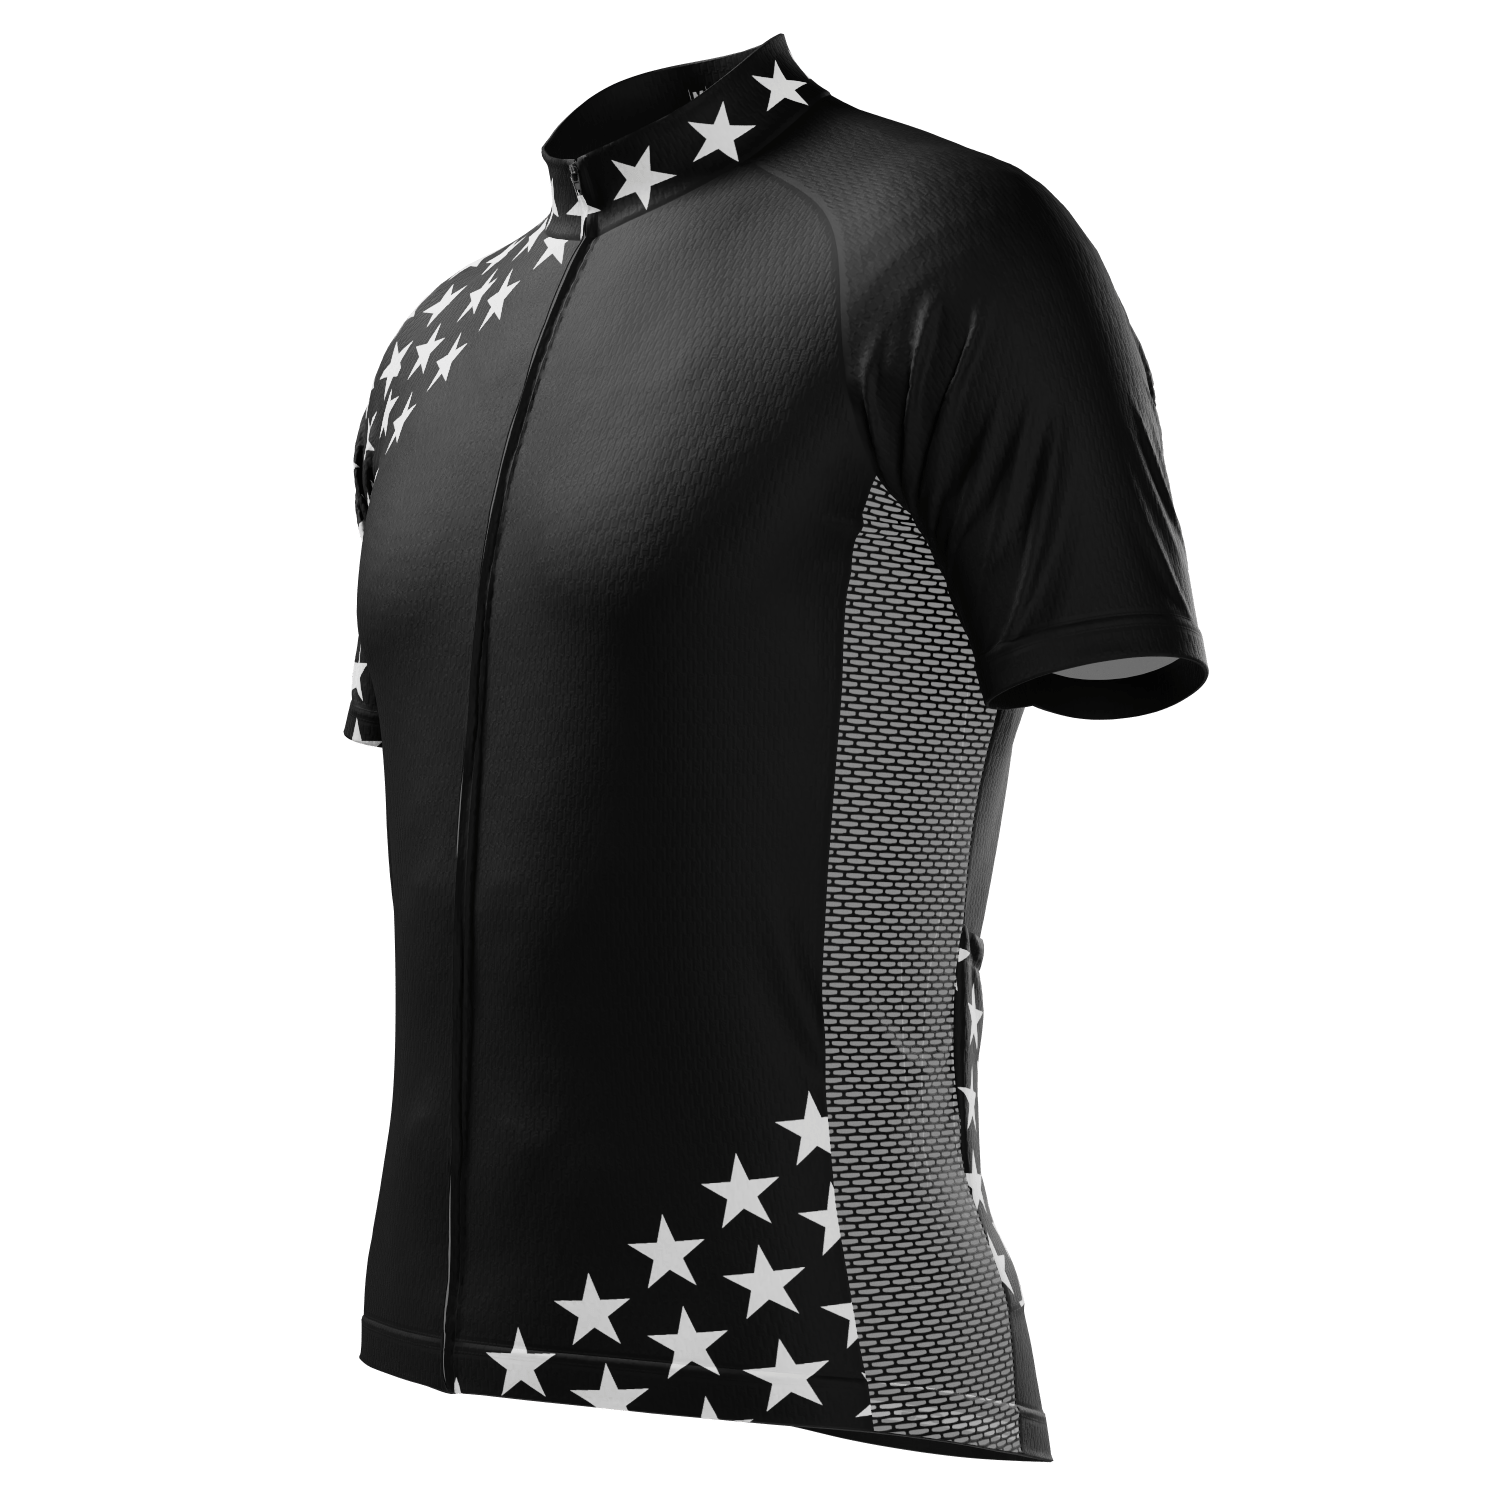 Men's Starred Short Sleeve Cycling Jersey